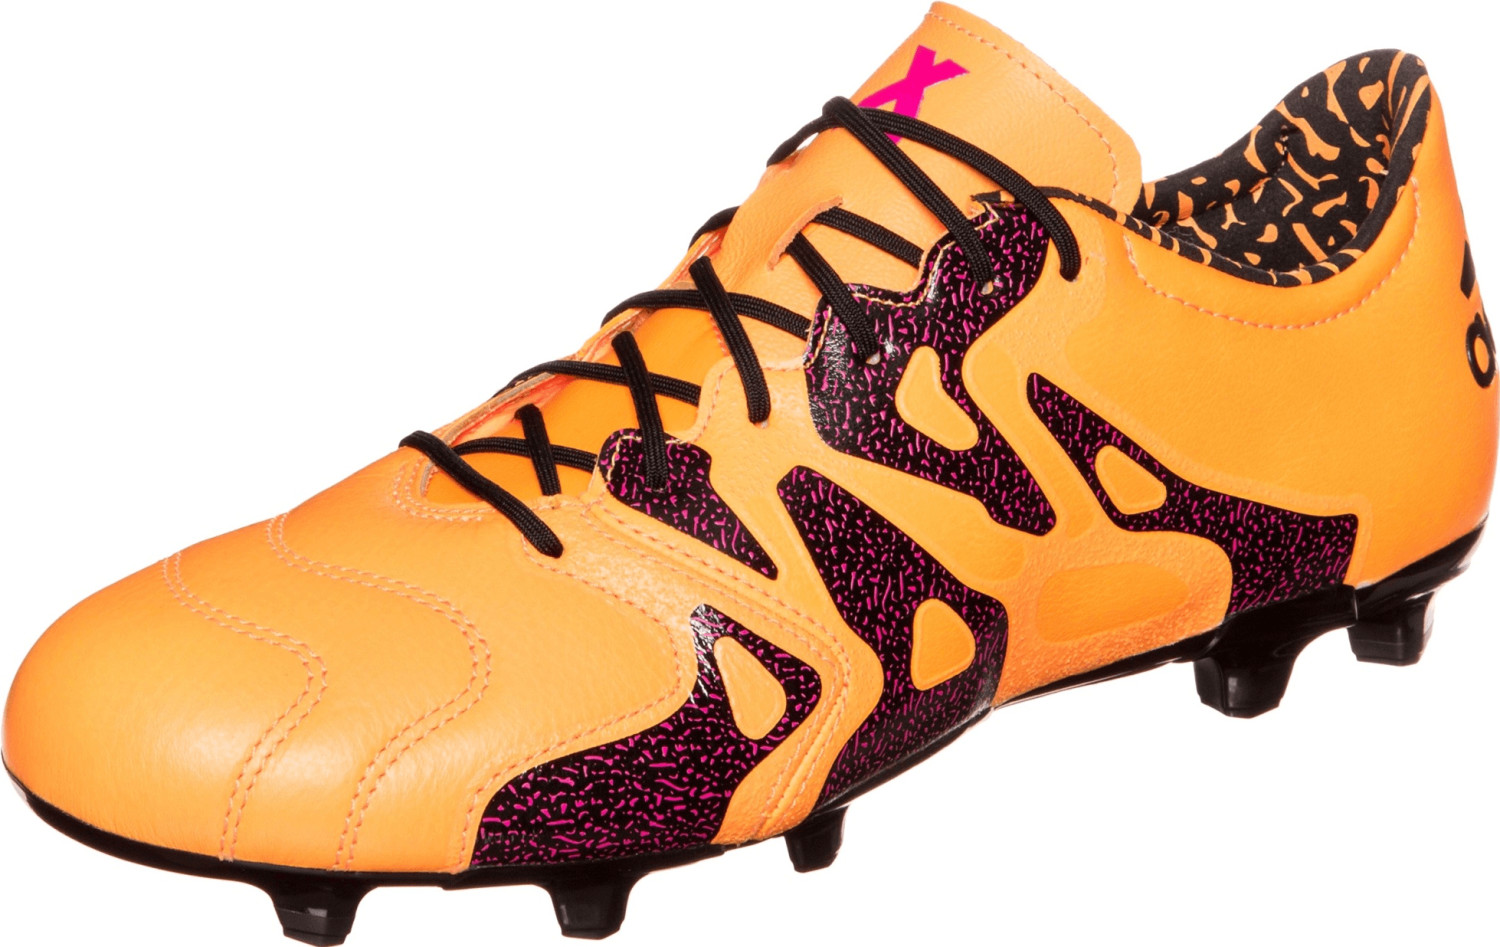 Adidas X15.2 FG/AG Leather solar gold/core black/shock pink